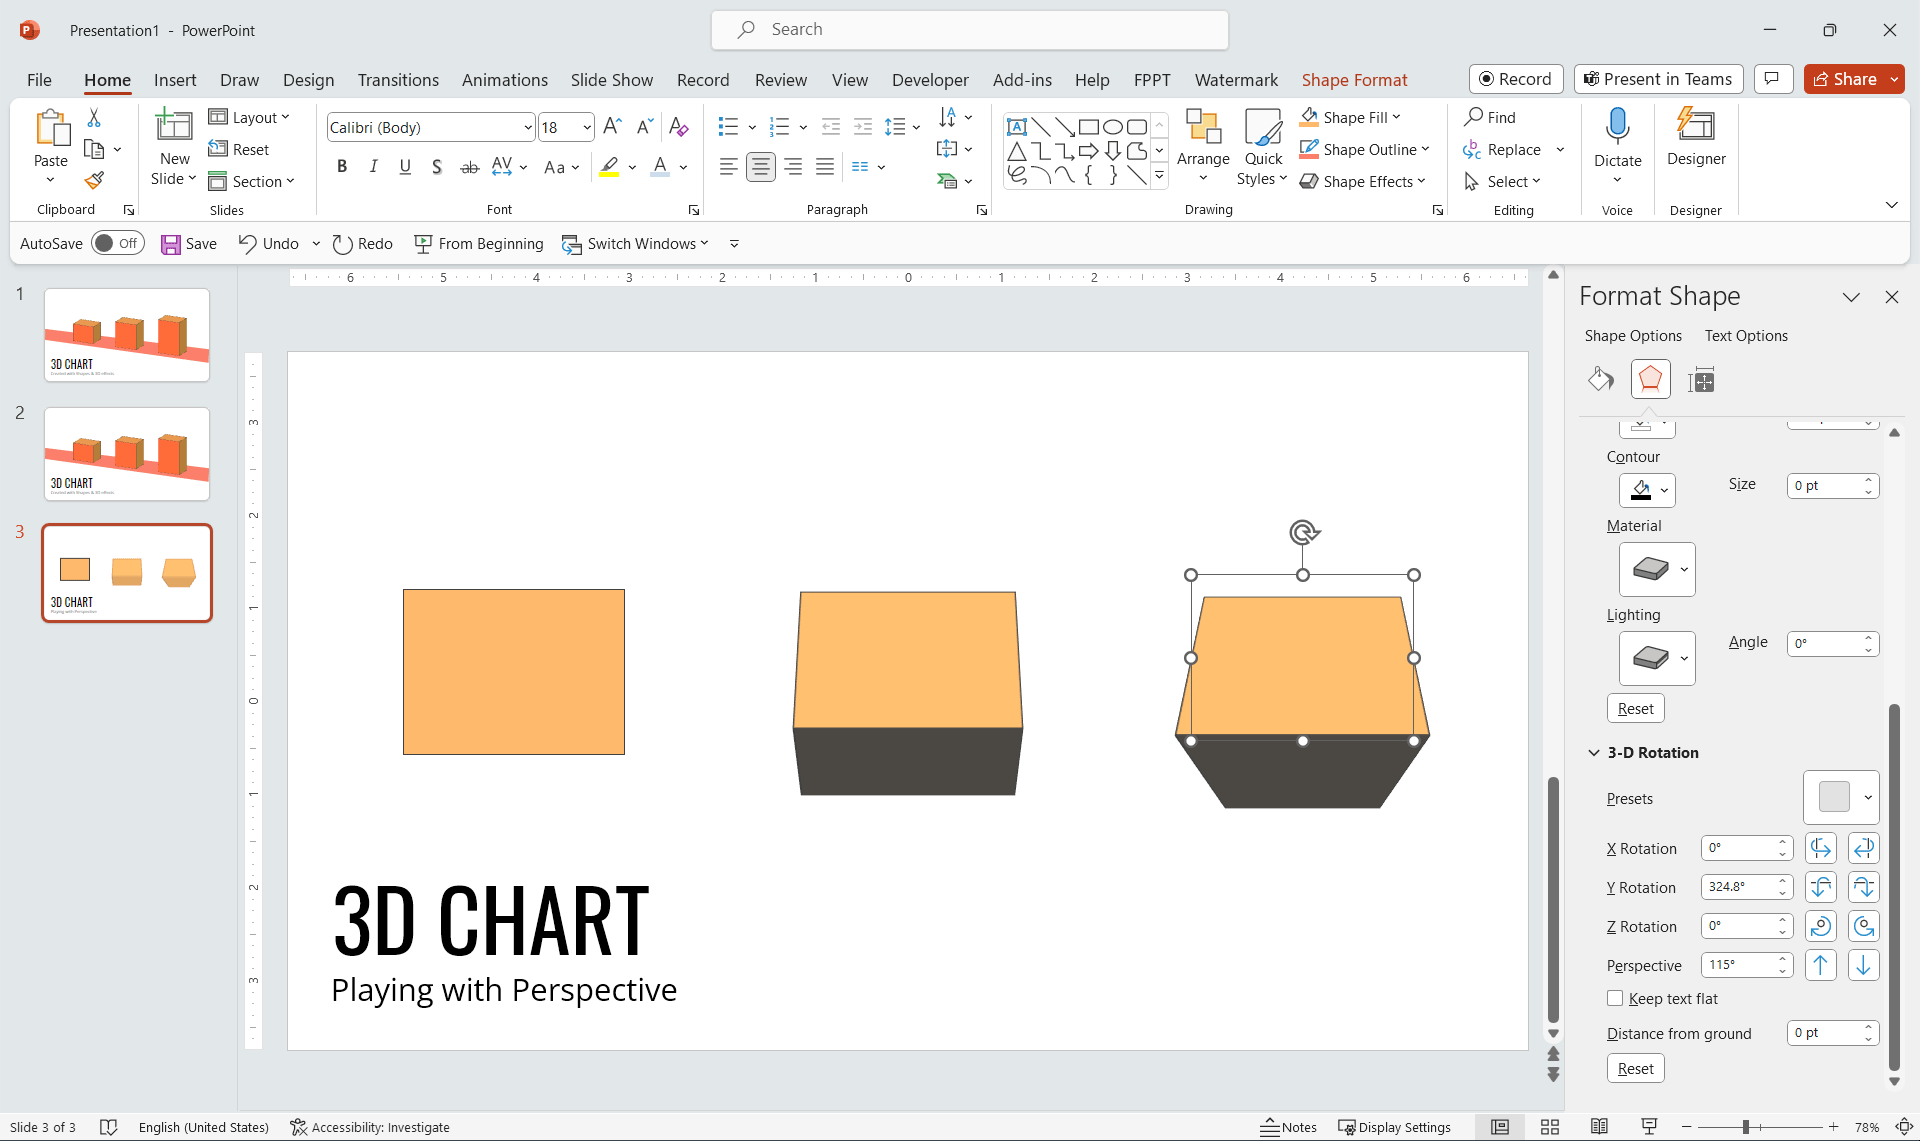 Create a 3D Chart in PowerPoint with perspective stacked bars.